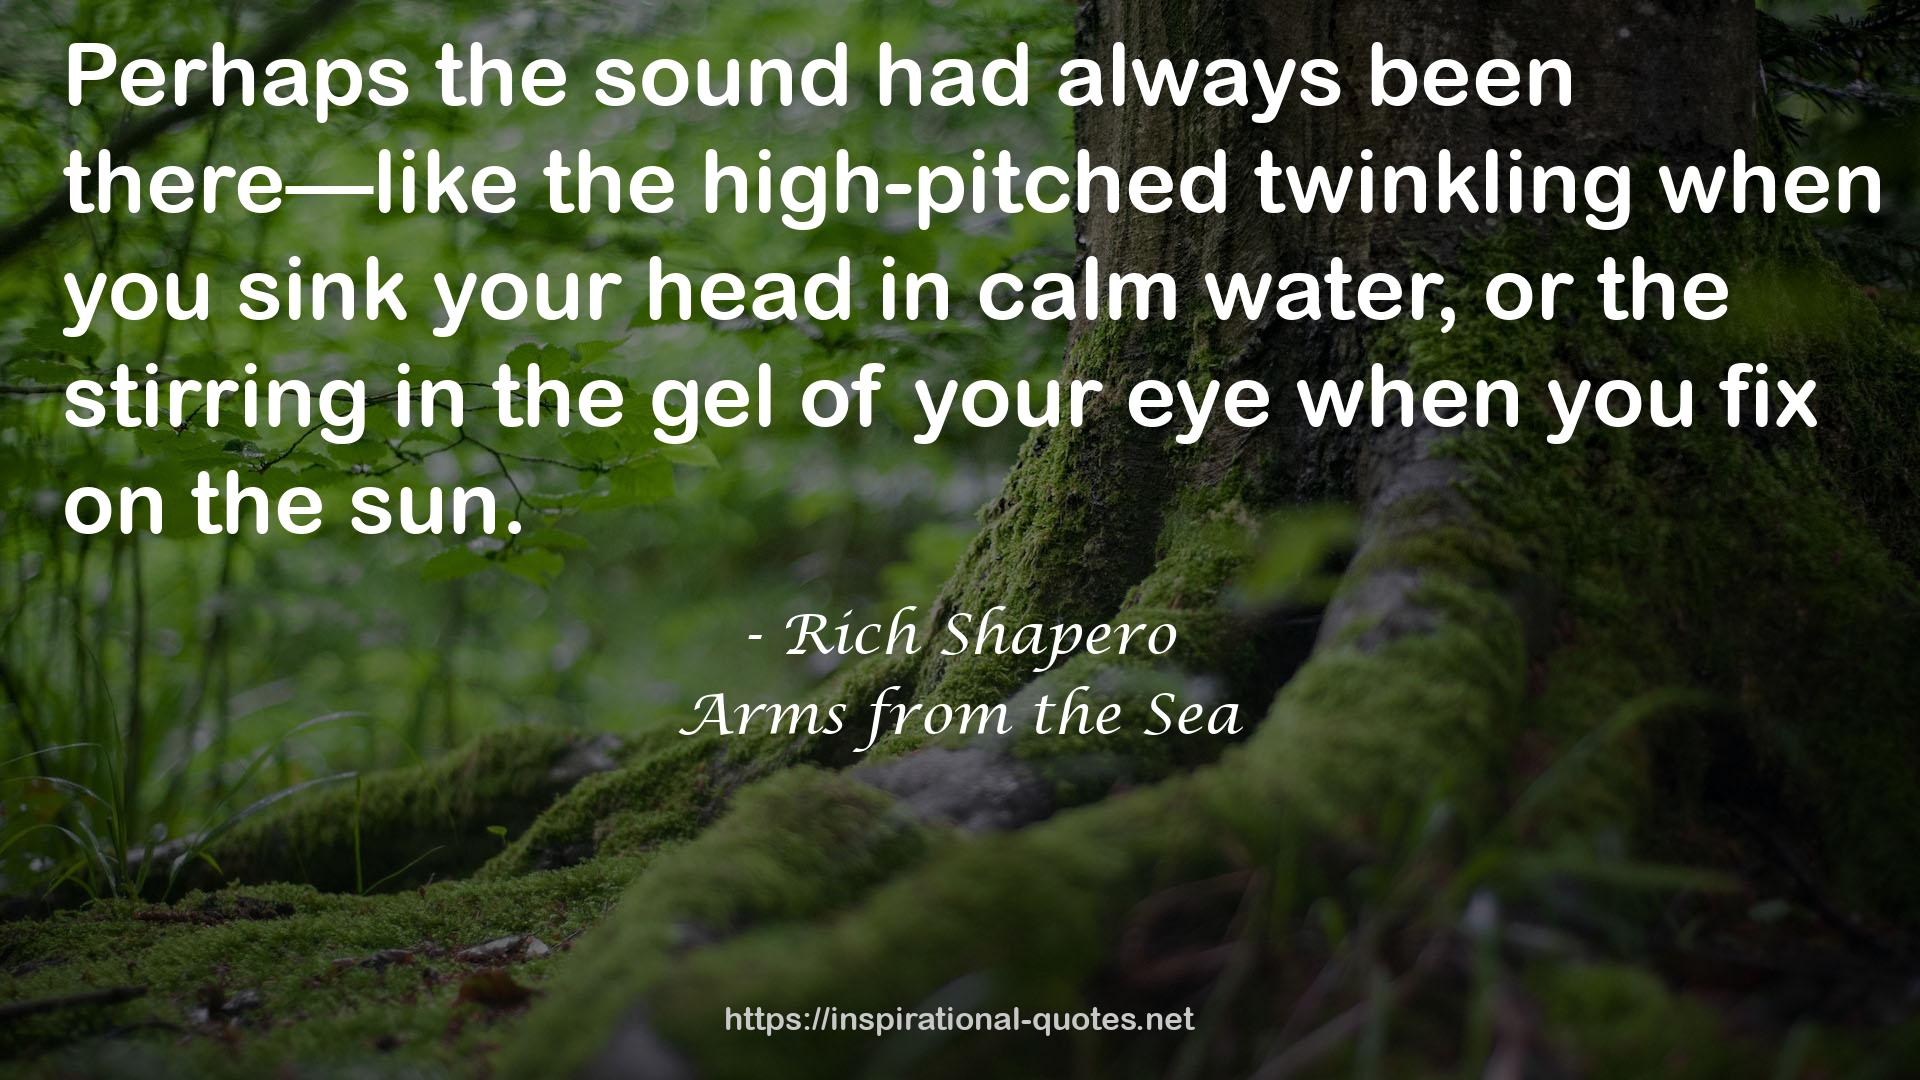 Arms from the Sea QUOTES